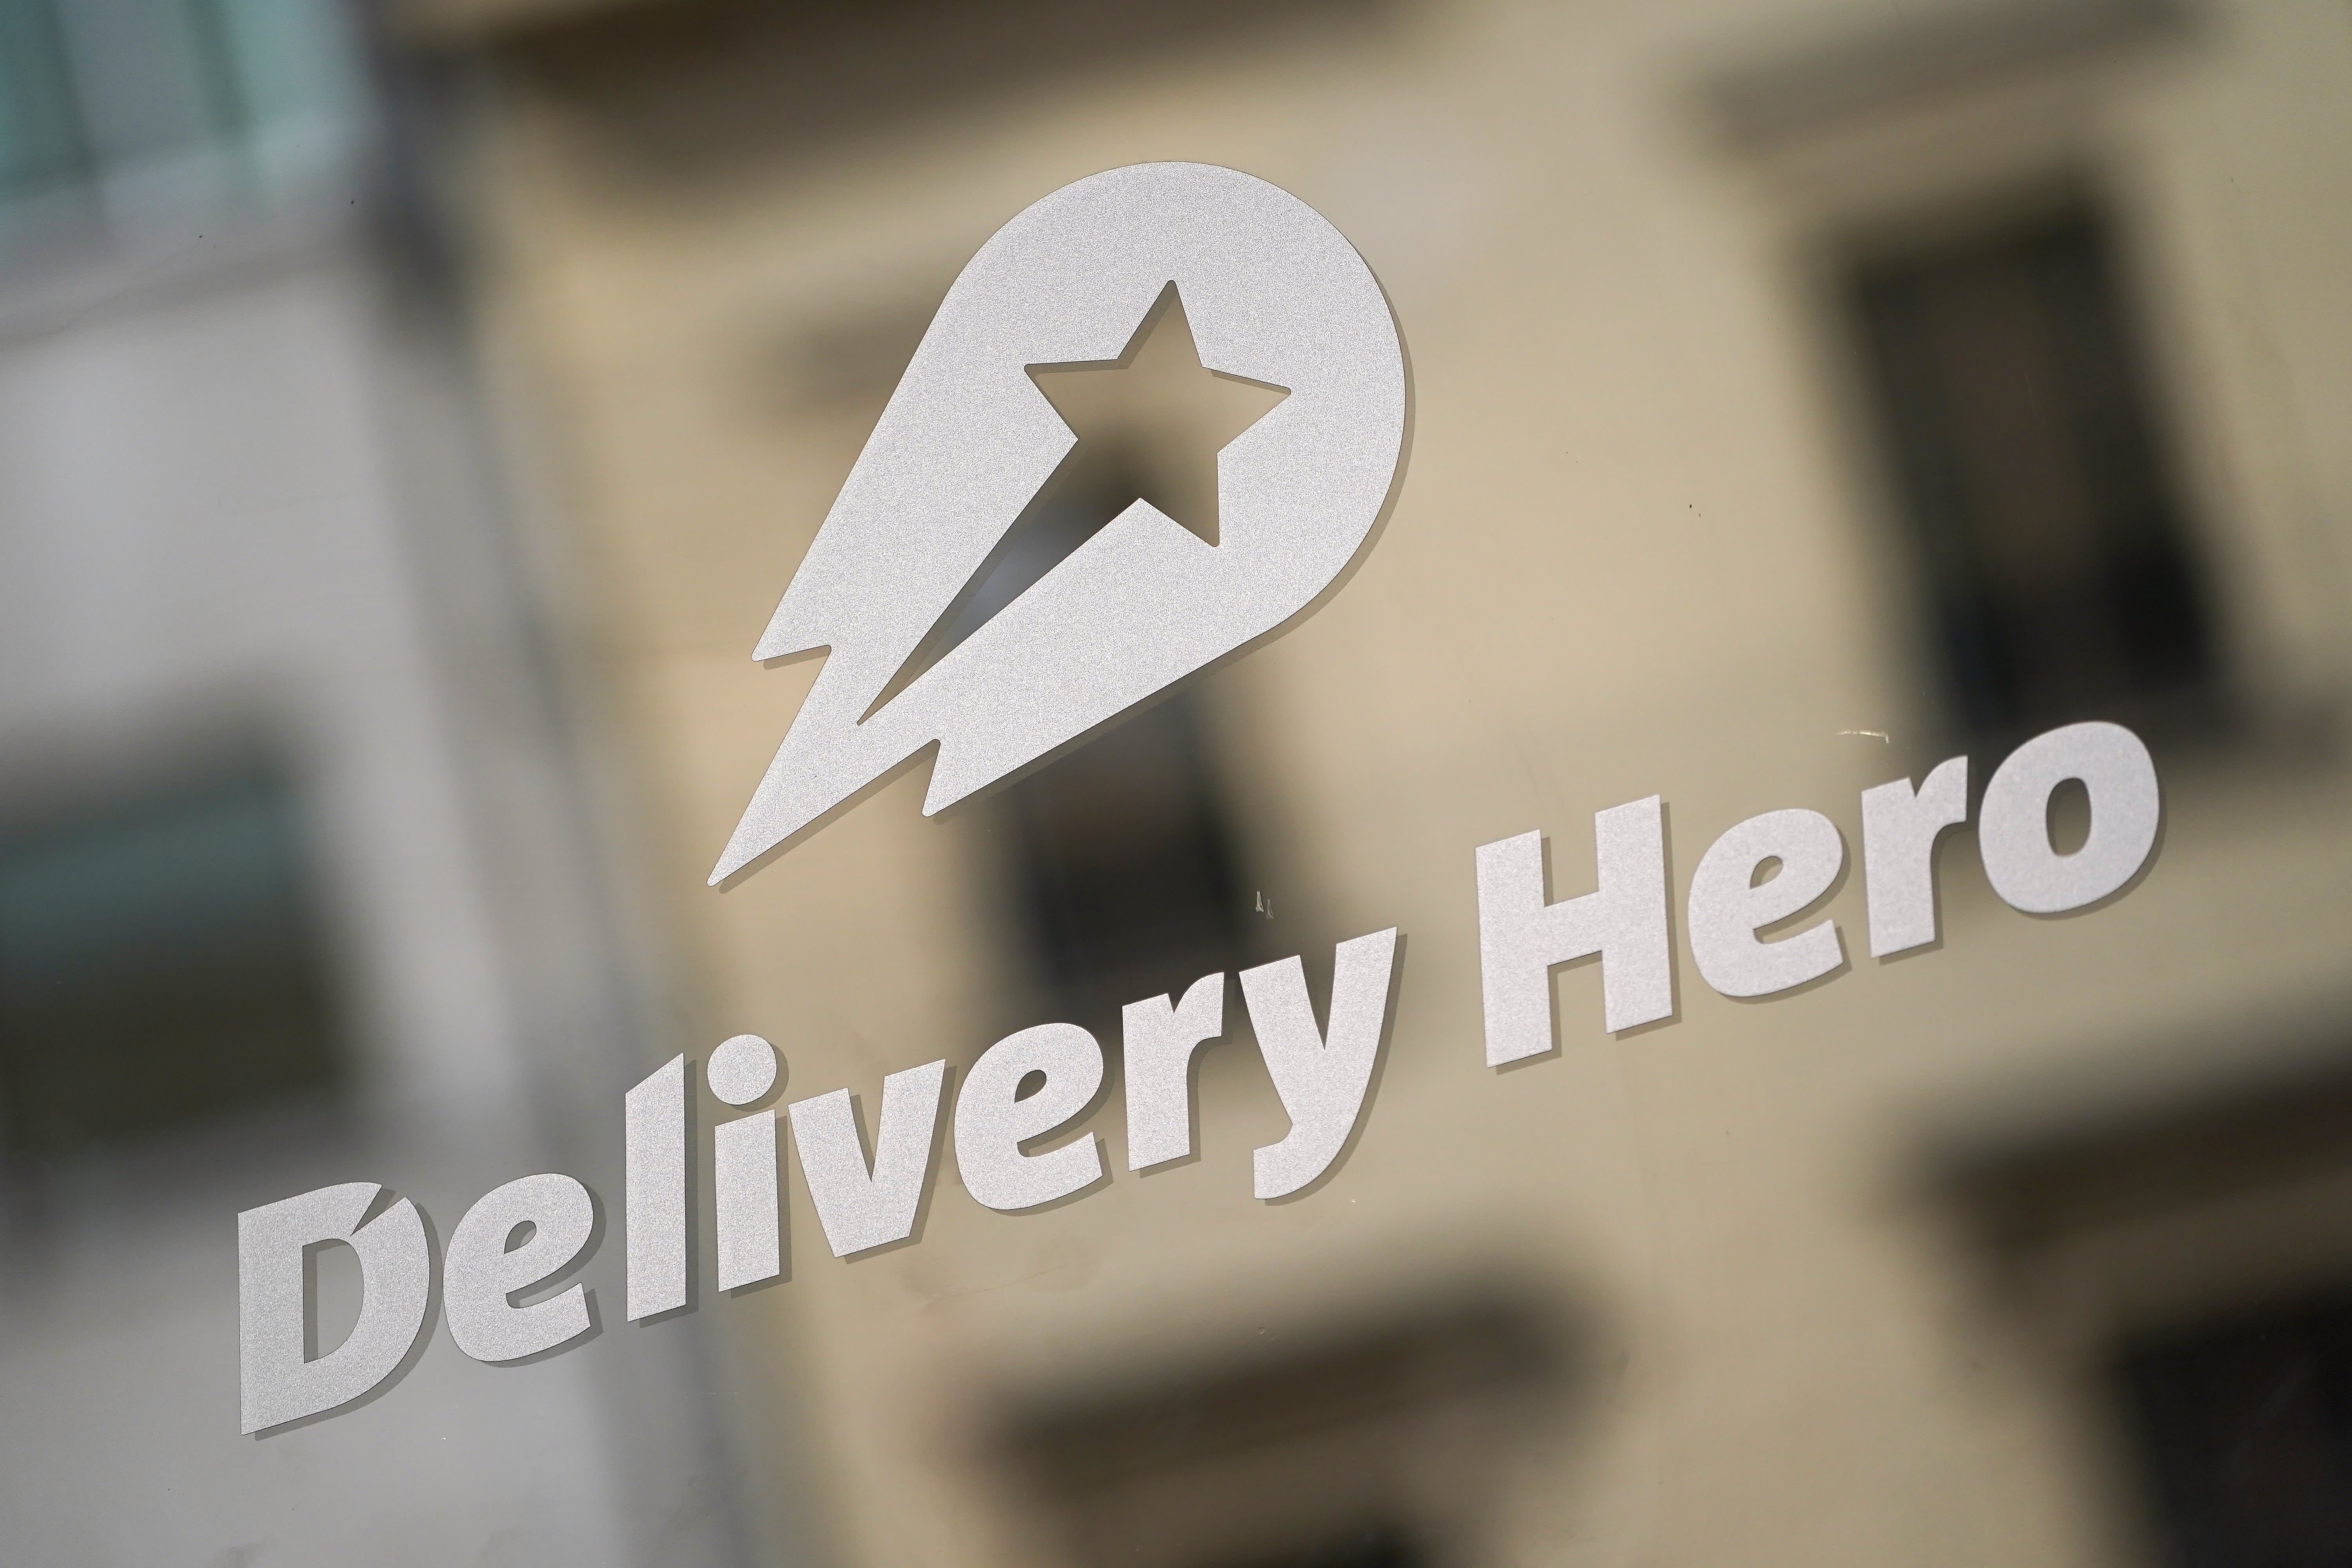 Delivery Hero shares plunge on disappointing 2022 earnings guidance